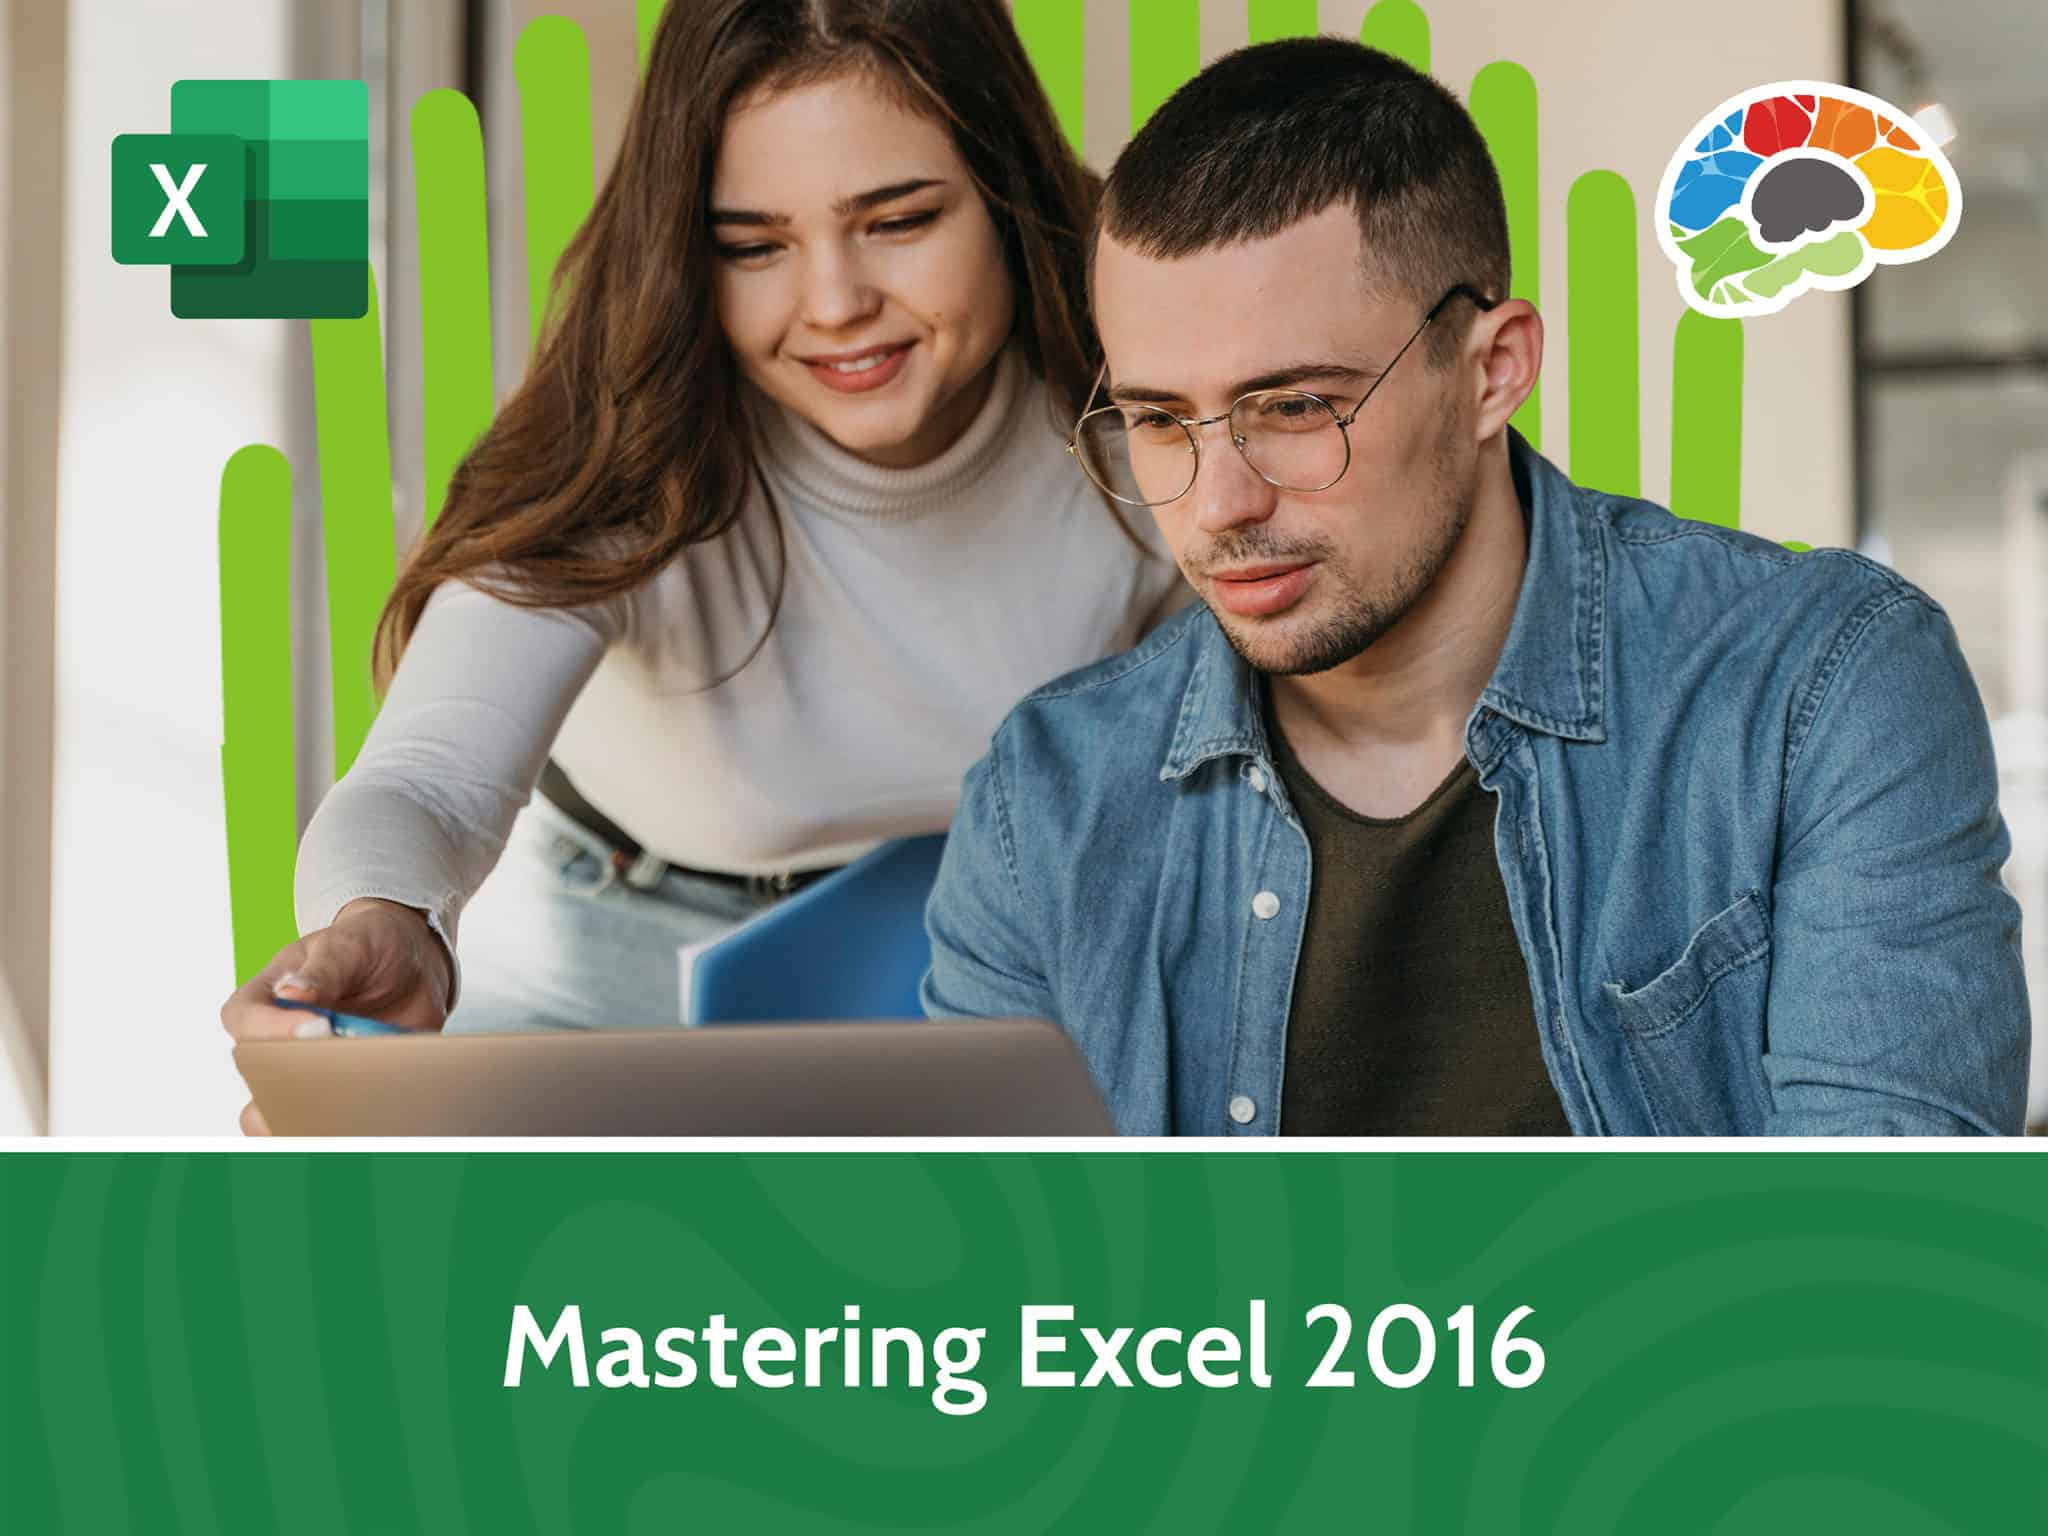 Mastering Excel 2016 scaled